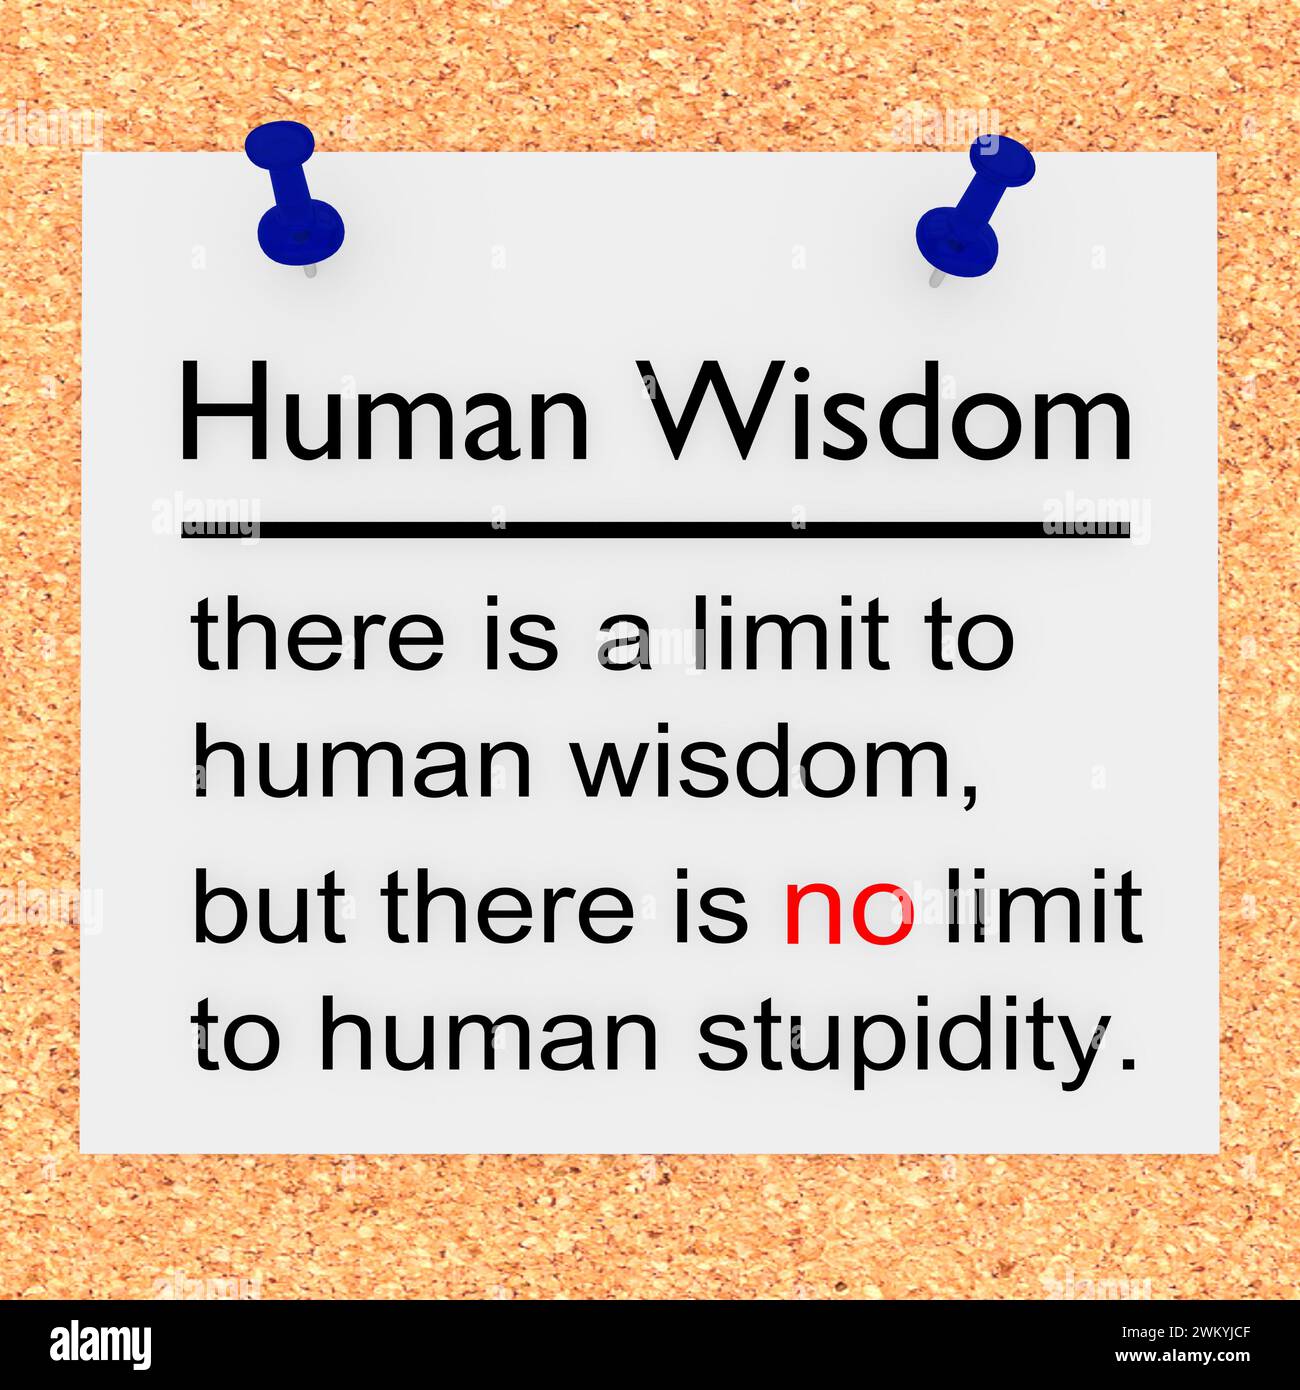 3D illustration of a text on a corkboard, concerning the limit to human wisdom. Stock Photo